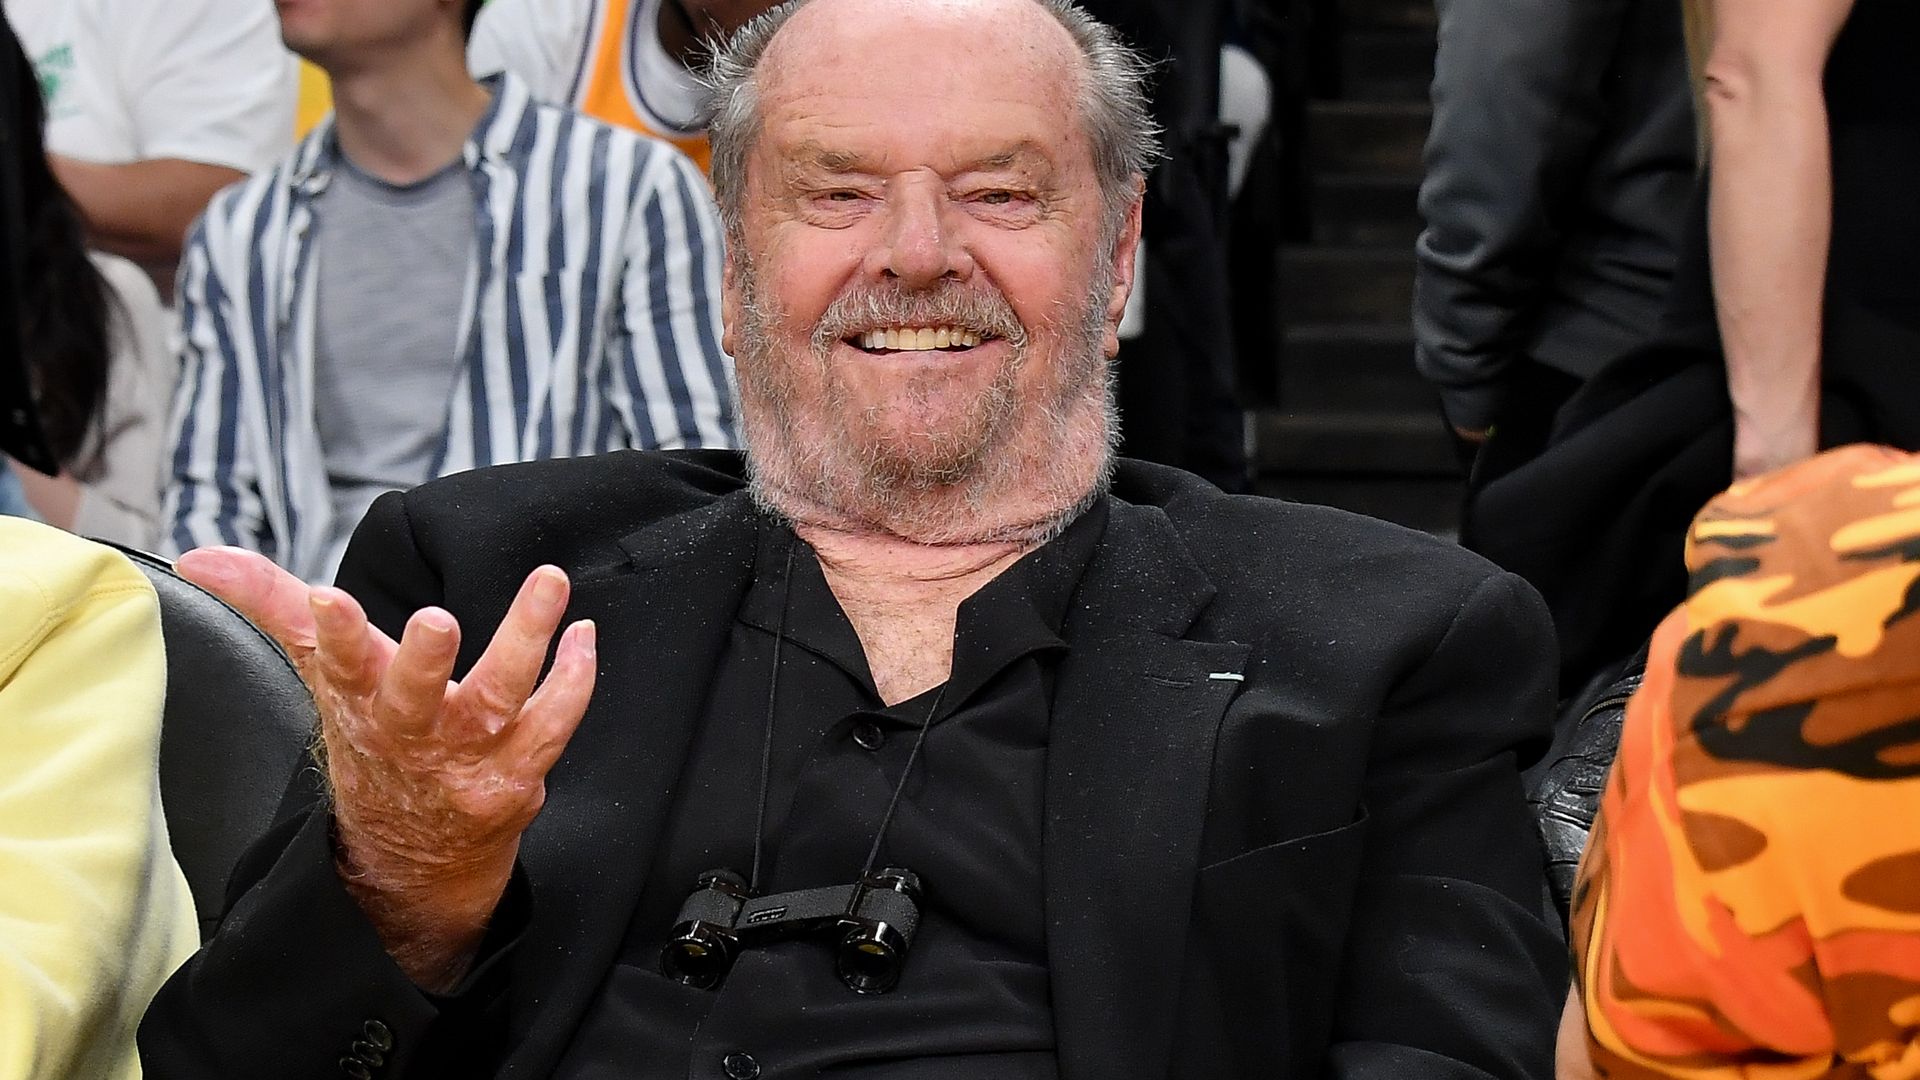  Jack Nicholson attends a playoff basketball game between the Los Angeles Lakers and the Golden State Warriors at Crypto.com Arena